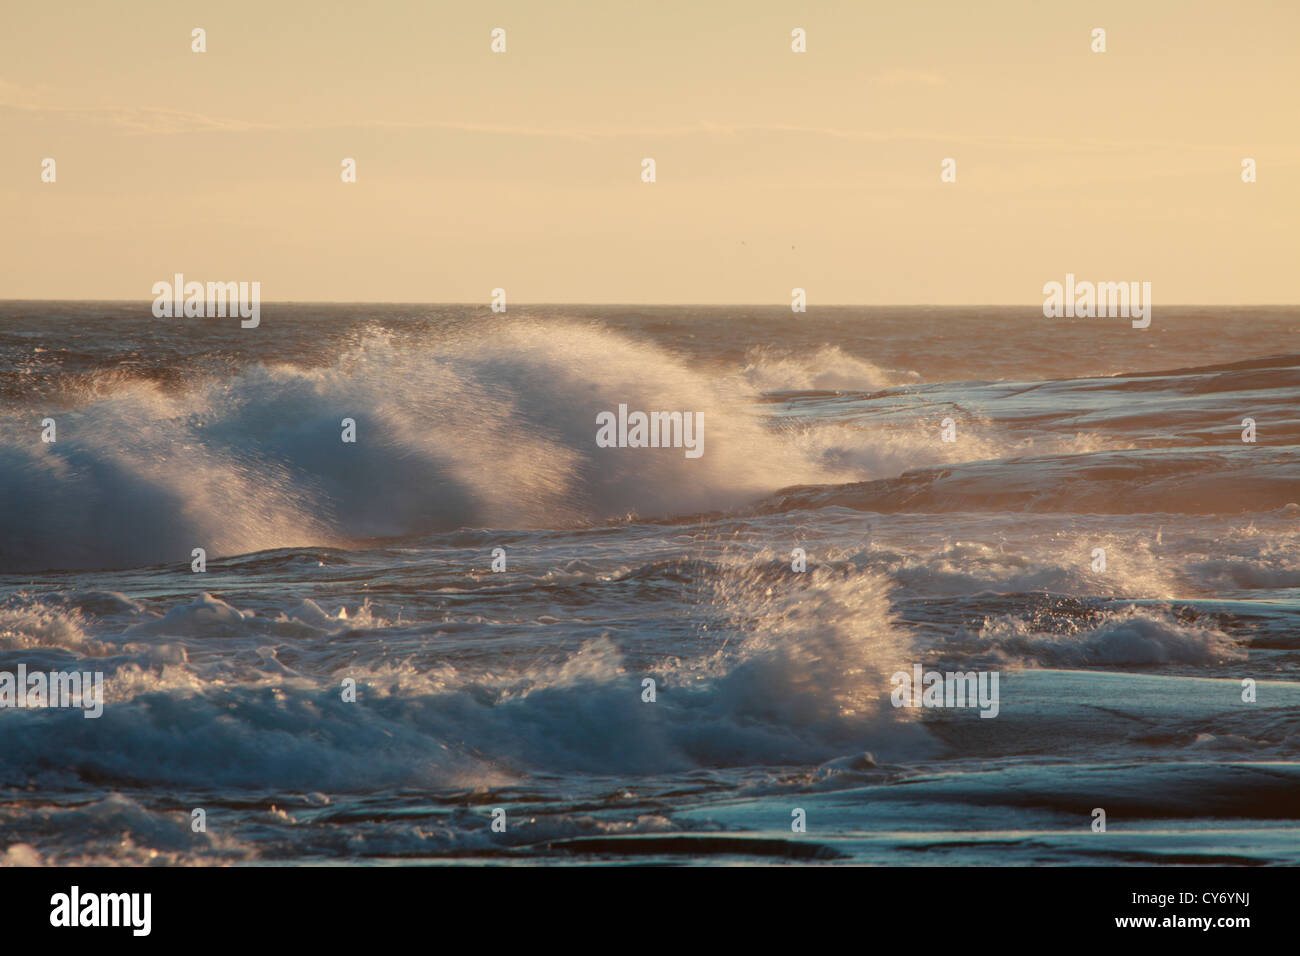 Storm-driven waves are crashing against the rocky coast of the Baltic Sea in Sweden. Stock Photo